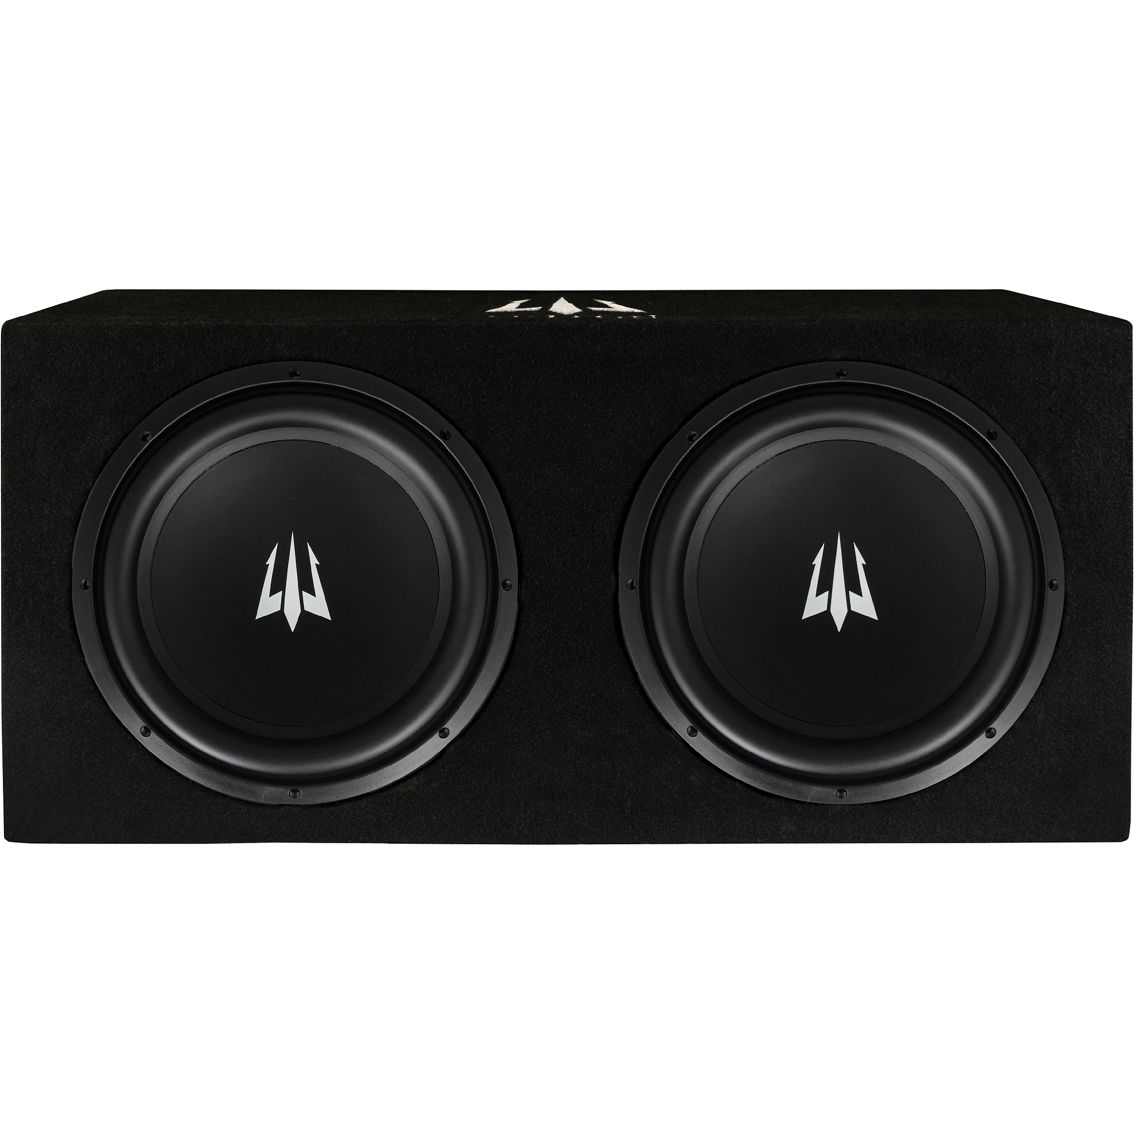 Triton EL102P 10 in. Dual Bass Package - Image 2 of 6